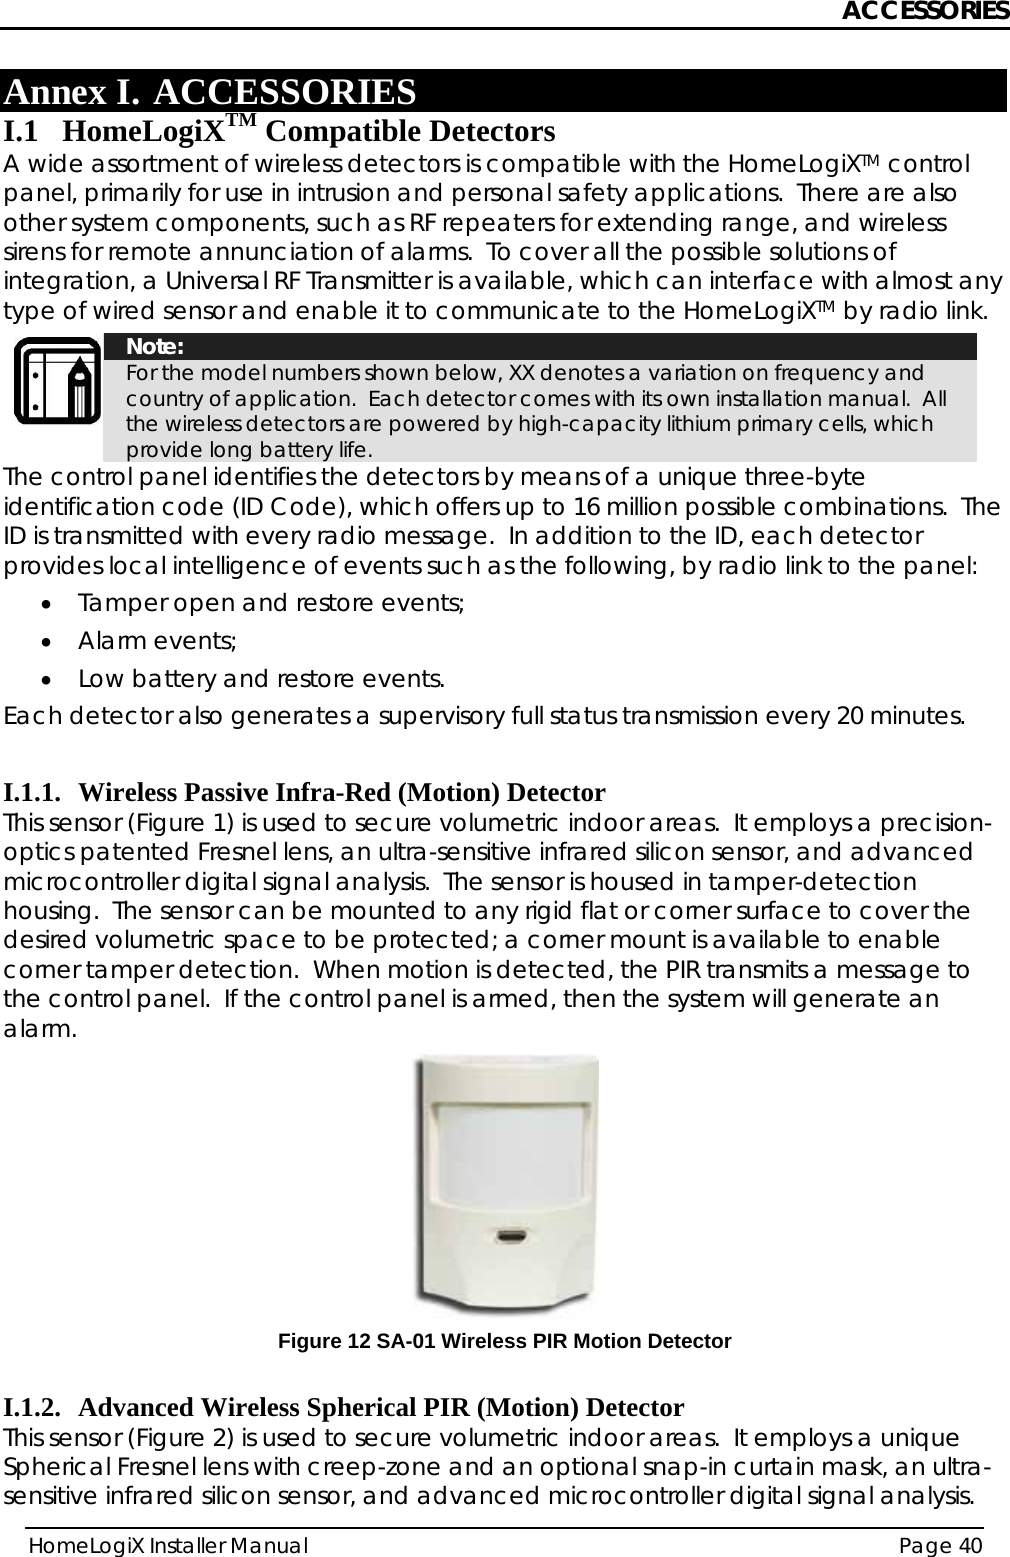 ACCESSORIES HomeLogiX Installer Manual  Page 40  Annex I. ACCESSORIES I.1 HomeLogiXTM Compatible Detectors A wide assortment of wireless detectors is compatible with the HomeLogiXTM control panel, primarily for use in intrusion and personal safety applications.  There are also other system components, such as RF repeaters for extending range, and wireless sirens for remote annunciation of alarms.  To cover all the possible solutions of integration, a Universal RF Transmitter is available, which can interface with almost any type of wired sensor and enable it to communicate to the HomeLogiXTM by radio link.  Note: For the model numbers shown below, XX denotes a variation on frequency and country of application.  Each detector comes with its own installation manual.  All the wireless detectors are powered by high-capacity lithium primary cells, which provide long battery life. The control panel identifies the detectors by means of a unique three-byte identification code (ID Code), which offers up to 16 million possible combinations.  The ID is transmitted with every radio message.  In addition to the ID, each detector provides local intelligence of events such as the following, by radio link to the panel: • Tamper open and restore events; • Alarm events; • Low battery and restore events. Each detector also generates a supervisory full status transmission every 20 minutes.    I.1.1. Wireless Passive Infra-Red (Motion) Detector This sensor (Figure 1) is used to secure volumetric indoor areas.  It employs a precision-optics patented Fresnel lens, an ultra-sensitive infrared silicon sensor, and advanced microcontroller digital signal analysis.  The sensor is housed in tamper-detection housing.  The sensor can be mounted to any rigid flat or corner surface to cover the desired volumetric space to be protected; a corner mount is available to enable corner tamper detection.  When motion is detected, the PIR transmits a message to the control panel.  If the control panel is armed, then the system will generate an alarm.  Figure 12 SA-01 Wireless PIR Motion Detector  I.1.2. Advanced Wireless Spherical PIR (Motion) Detector This sensor (Figure 2) is used to secure volumetric indoor areas.  It employs a unique Spherical Fresnel lens with creep-zone and an optional snap-in curtain mask, an ultra-sensitive infrared silicon sensor, and advanced microcontroller digital signal analysis.  